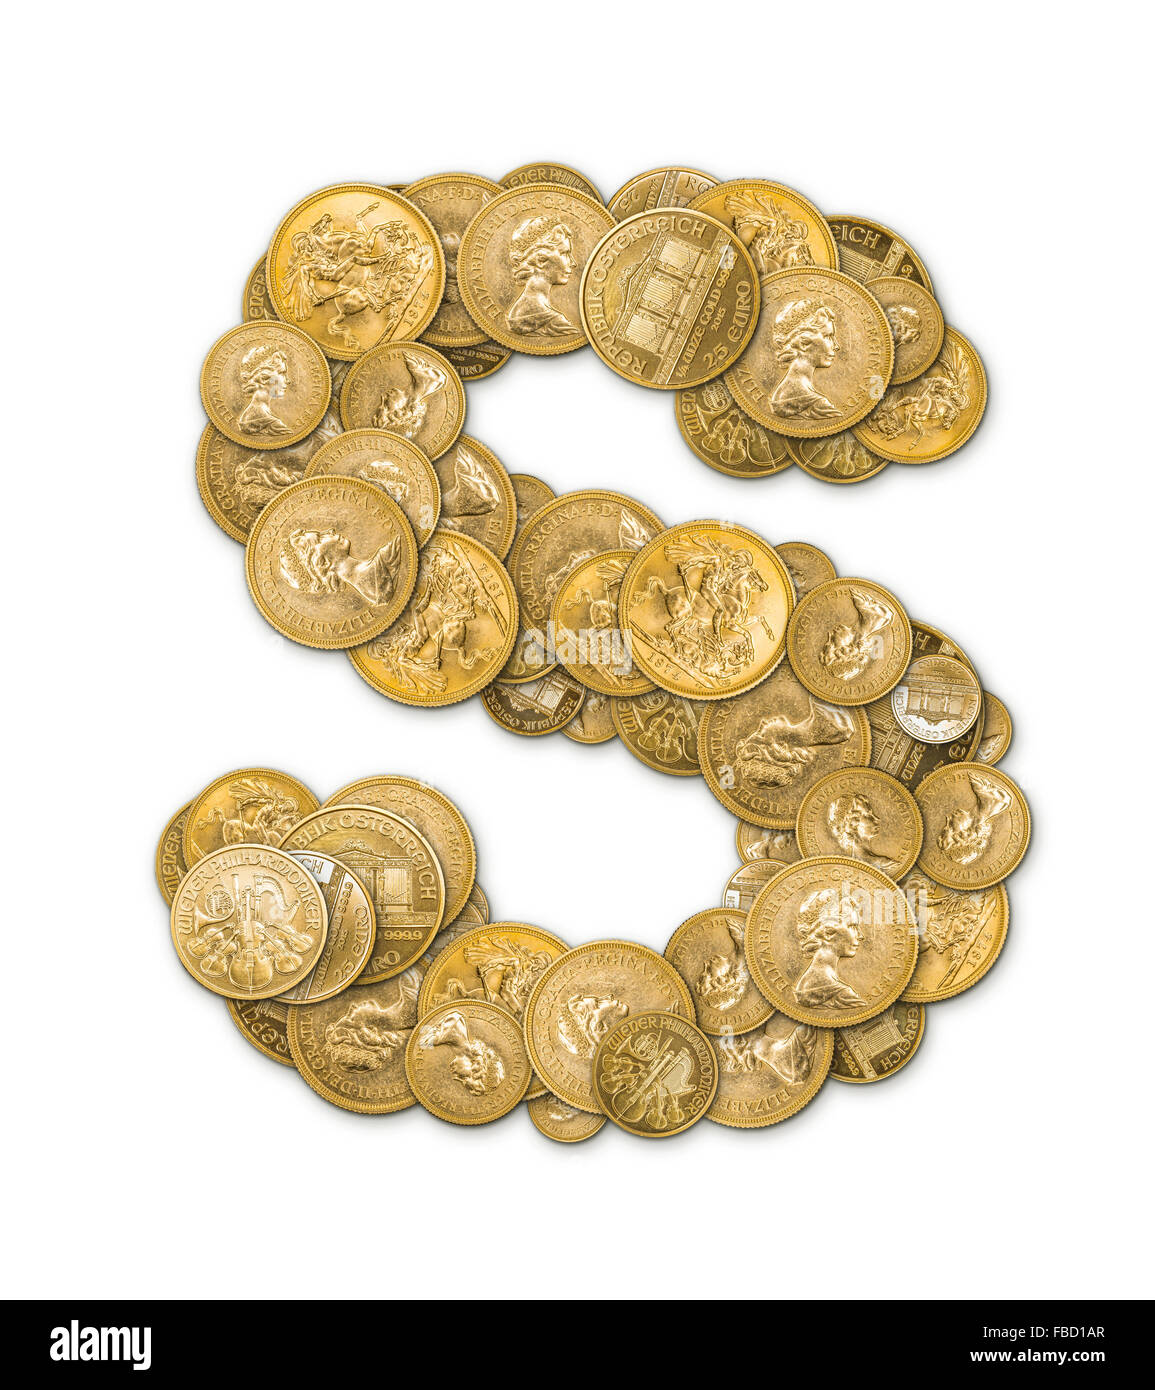 Letter S made from gold coins money isolated on white background Stock Photo